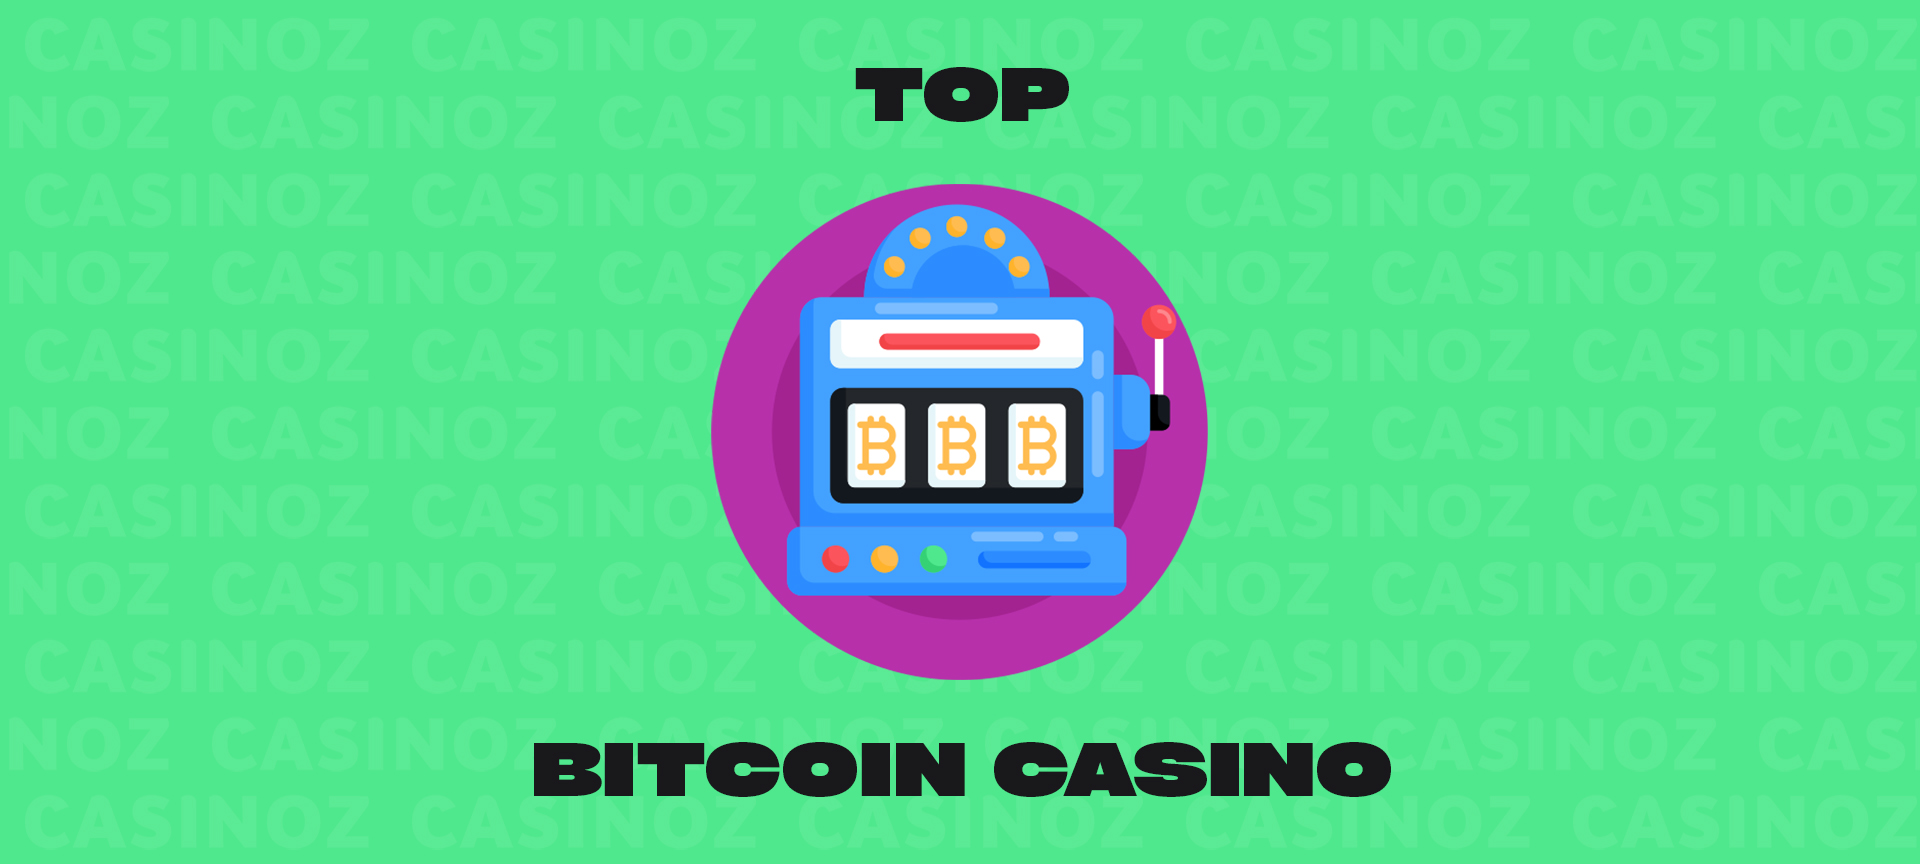 How cryptocurrency gambling Made Me A Better Salesperson